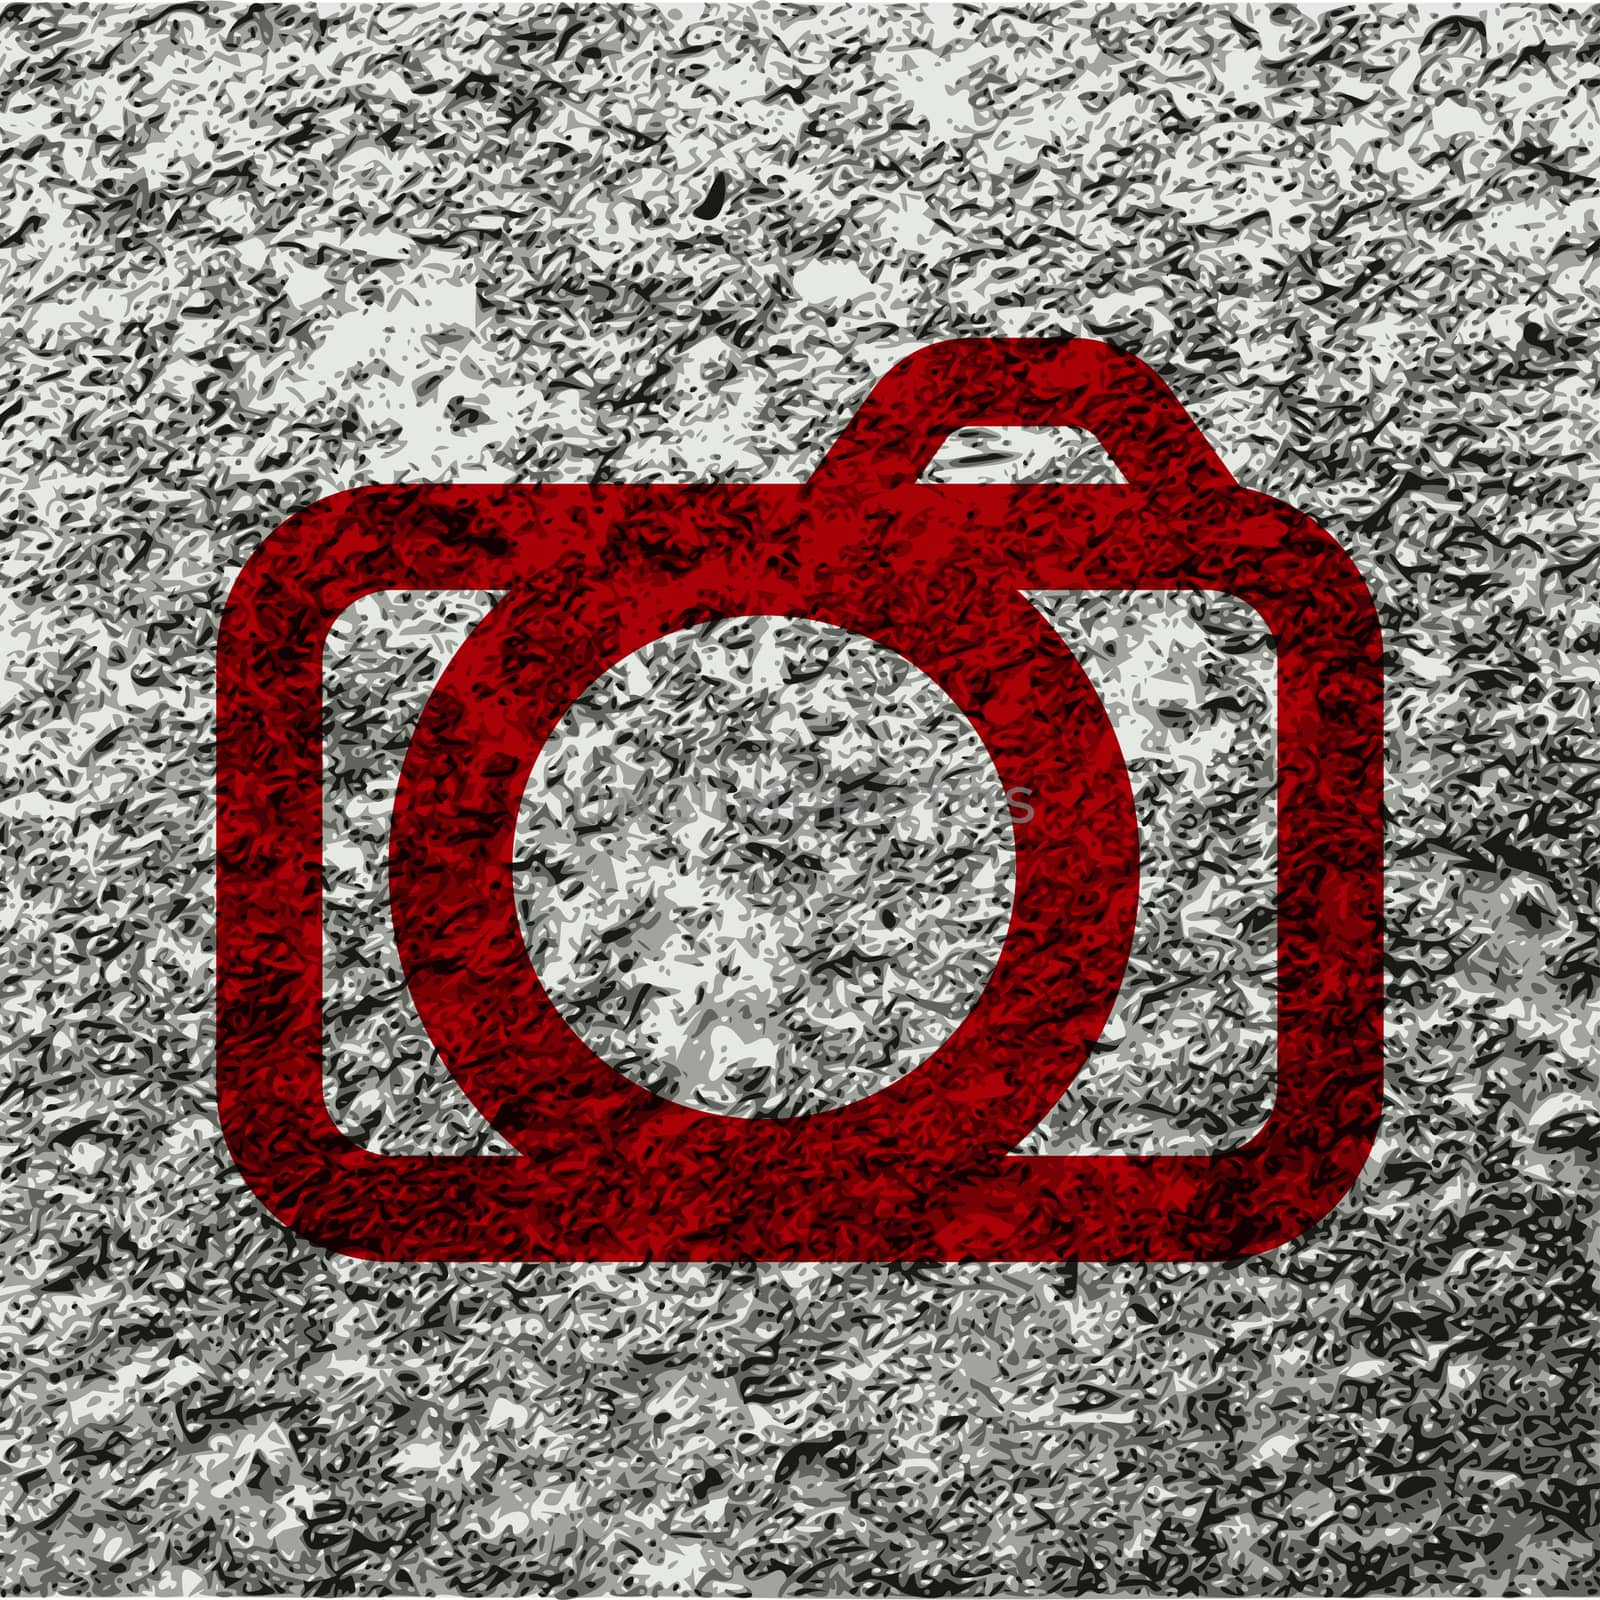 Camera icon Flat with abstract background by serhii_lohvyniuk